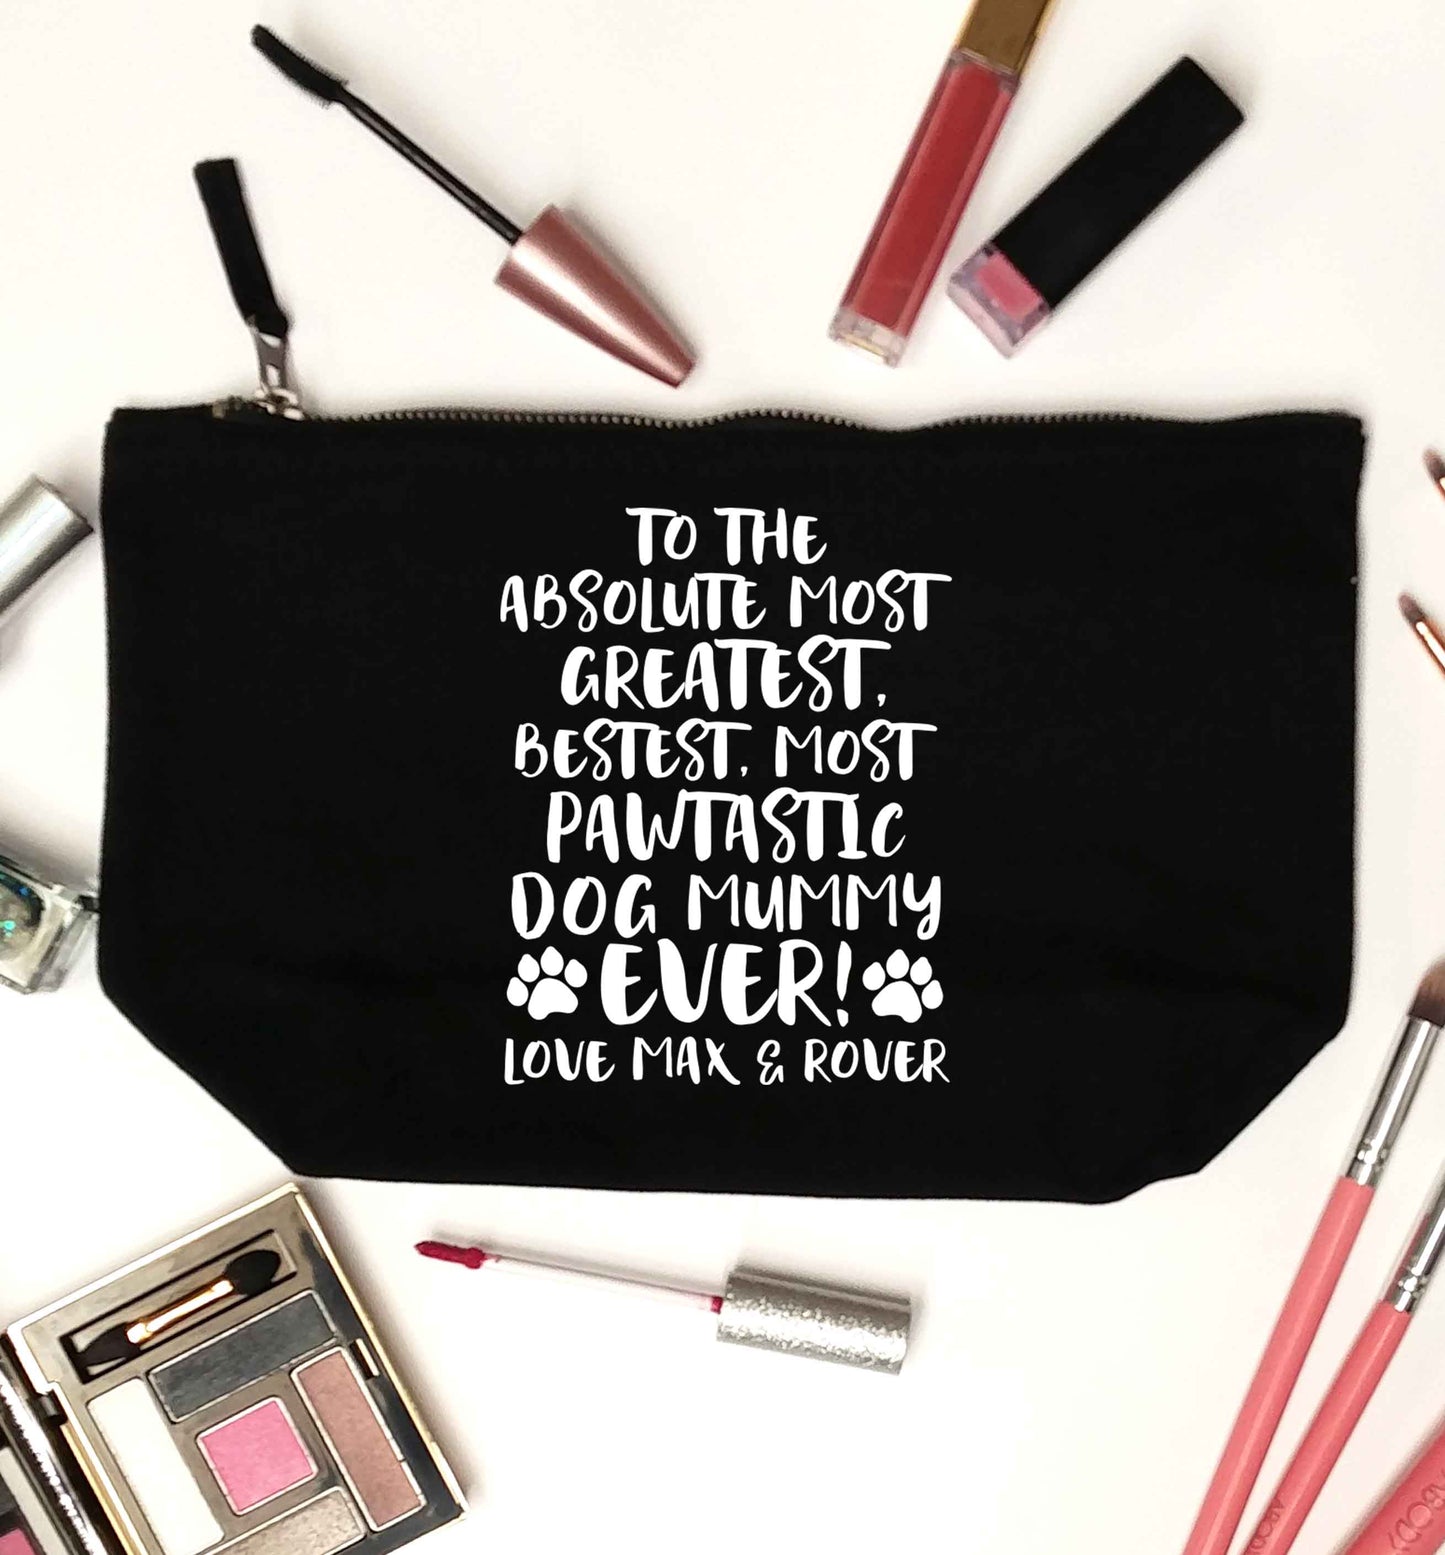 Personalsied to the most pawtastic dog mummy ever black makeup bag